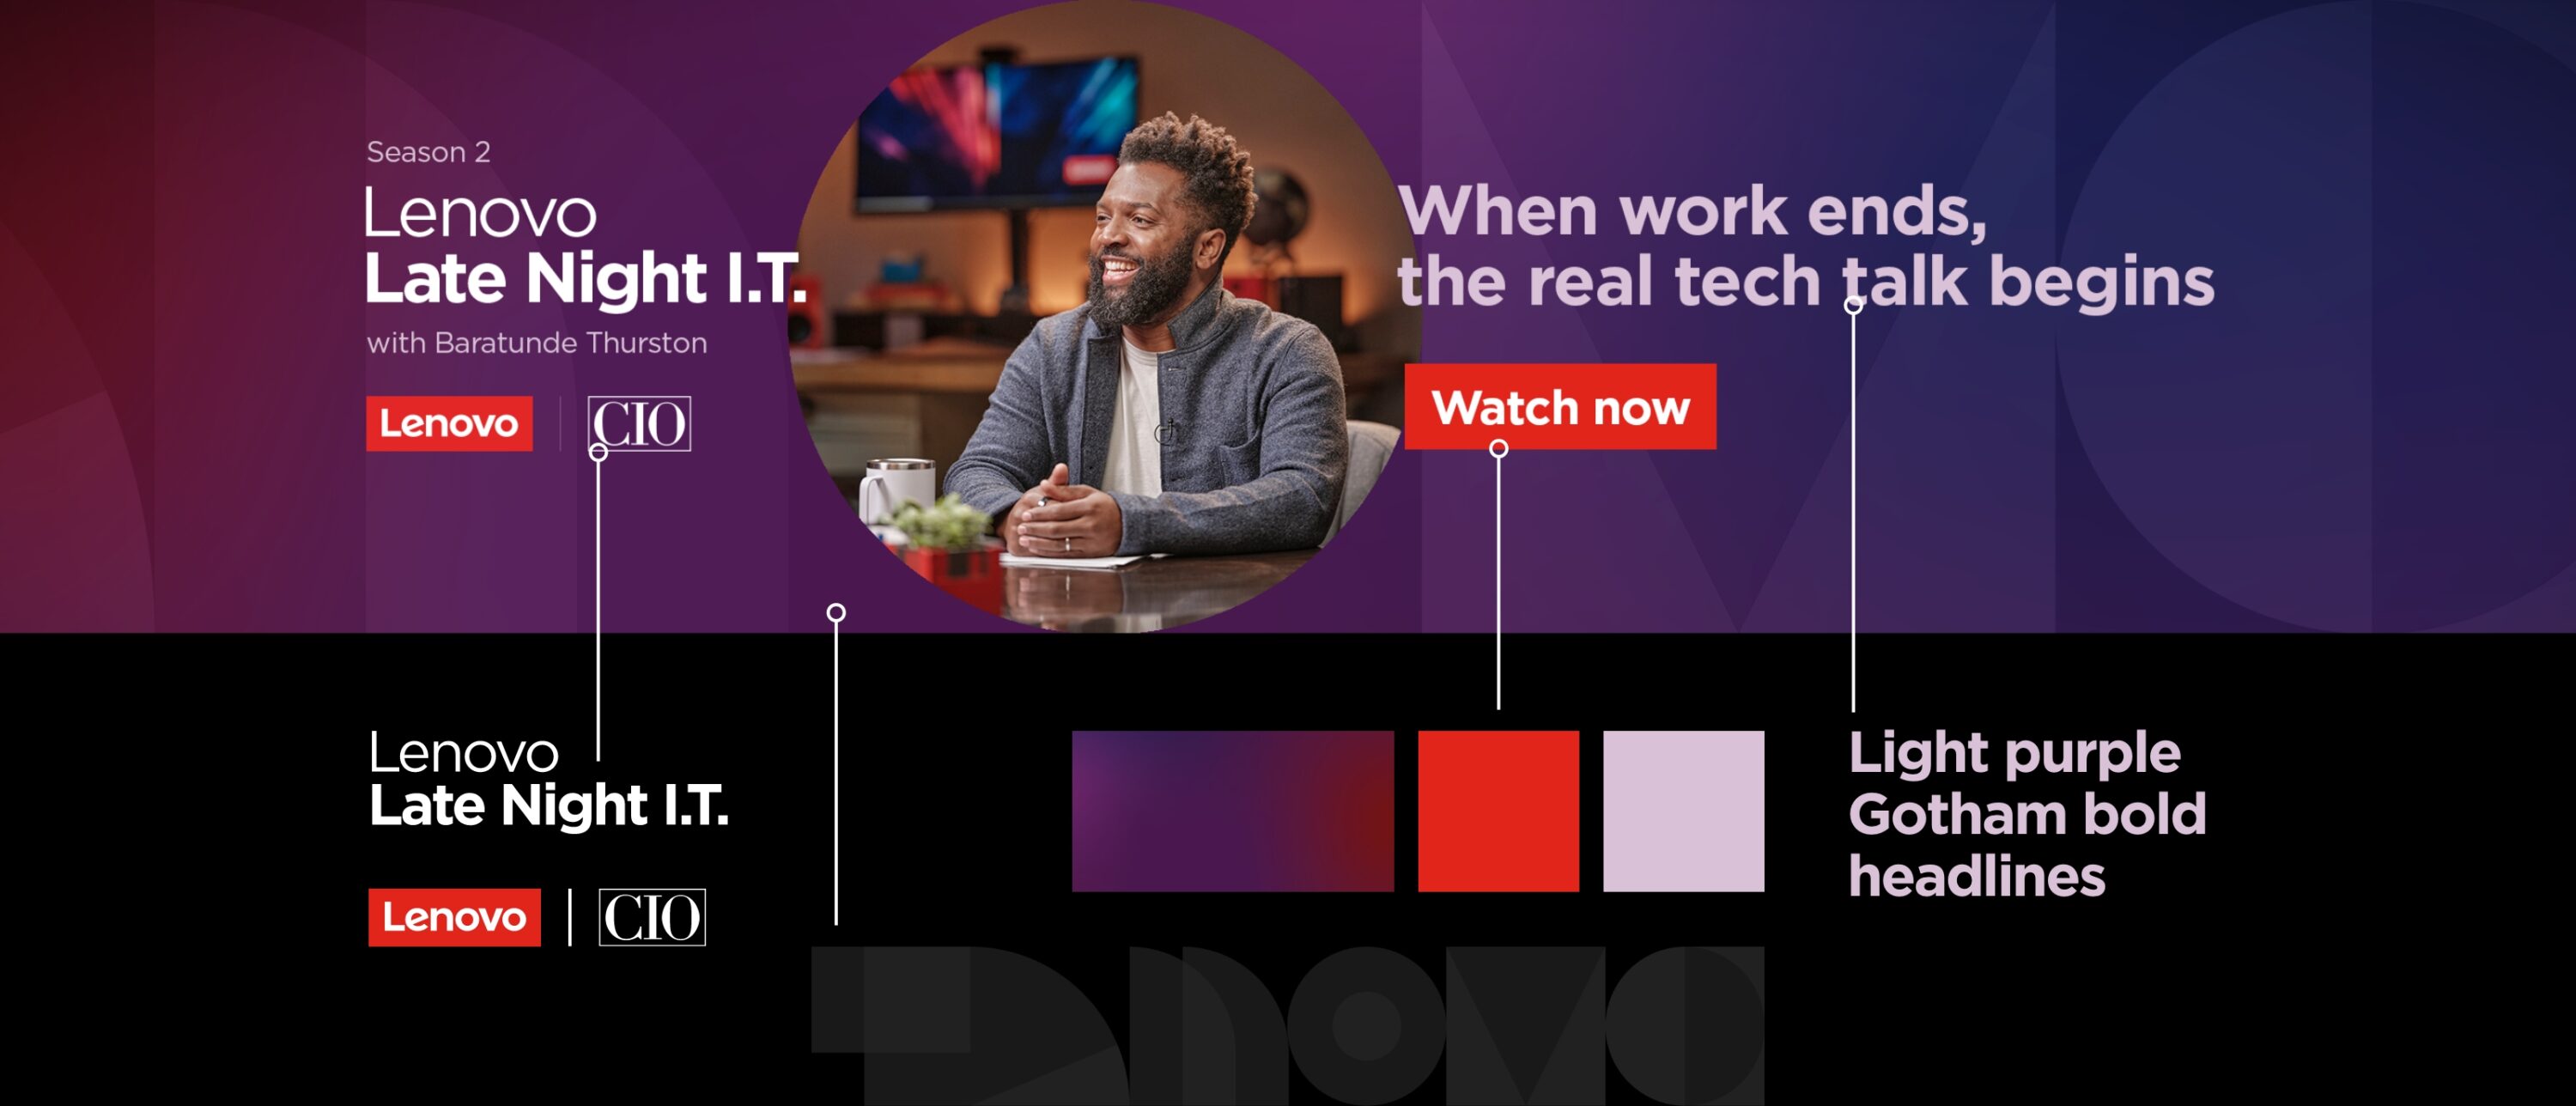 Lenovo Late Night I.T. series: Brand Style Guide